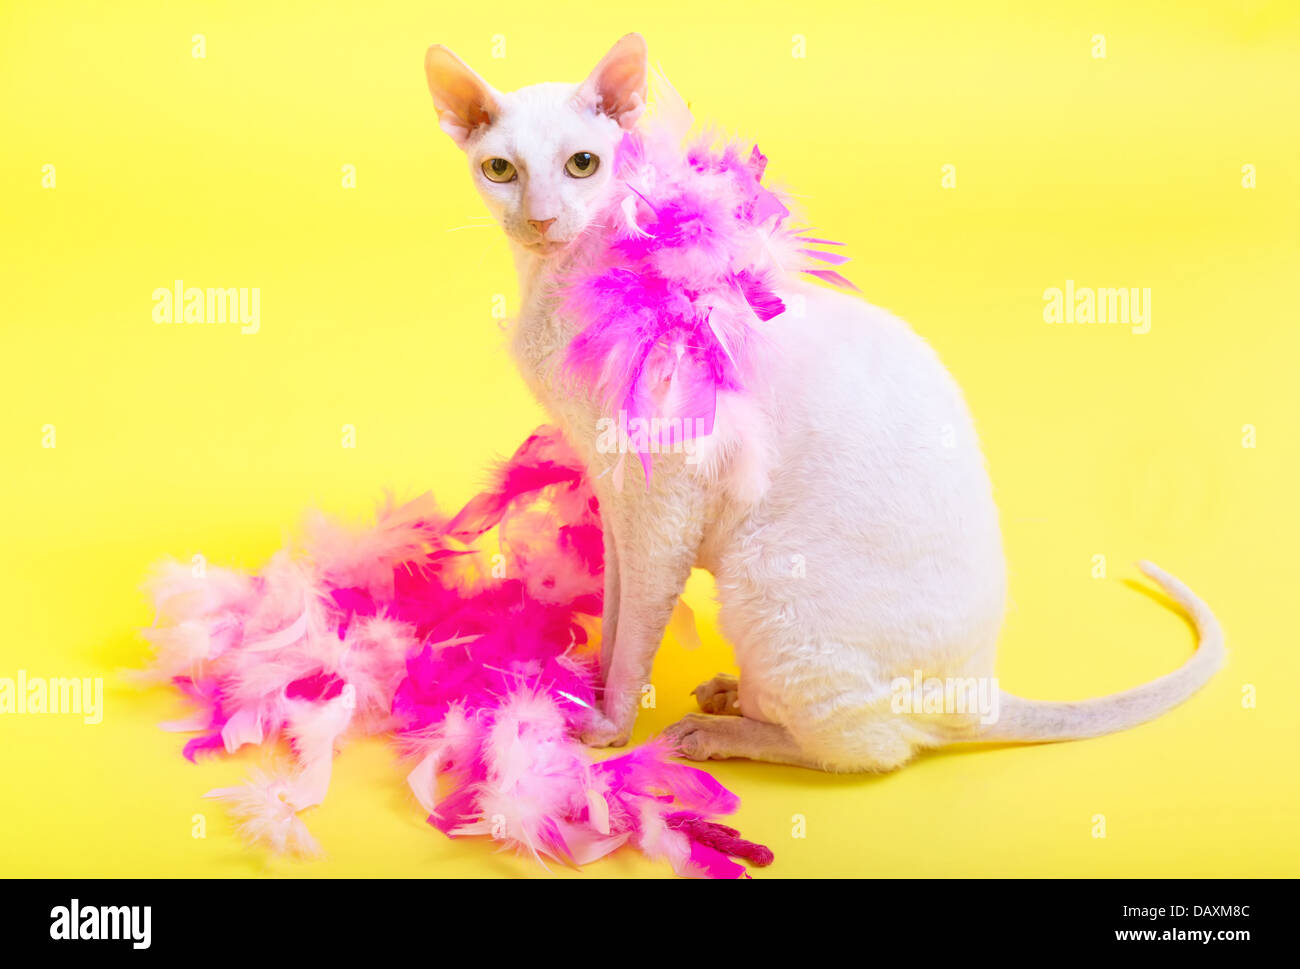 Cornish Rex cat with her pink boa on a yellow background. Stock Photo